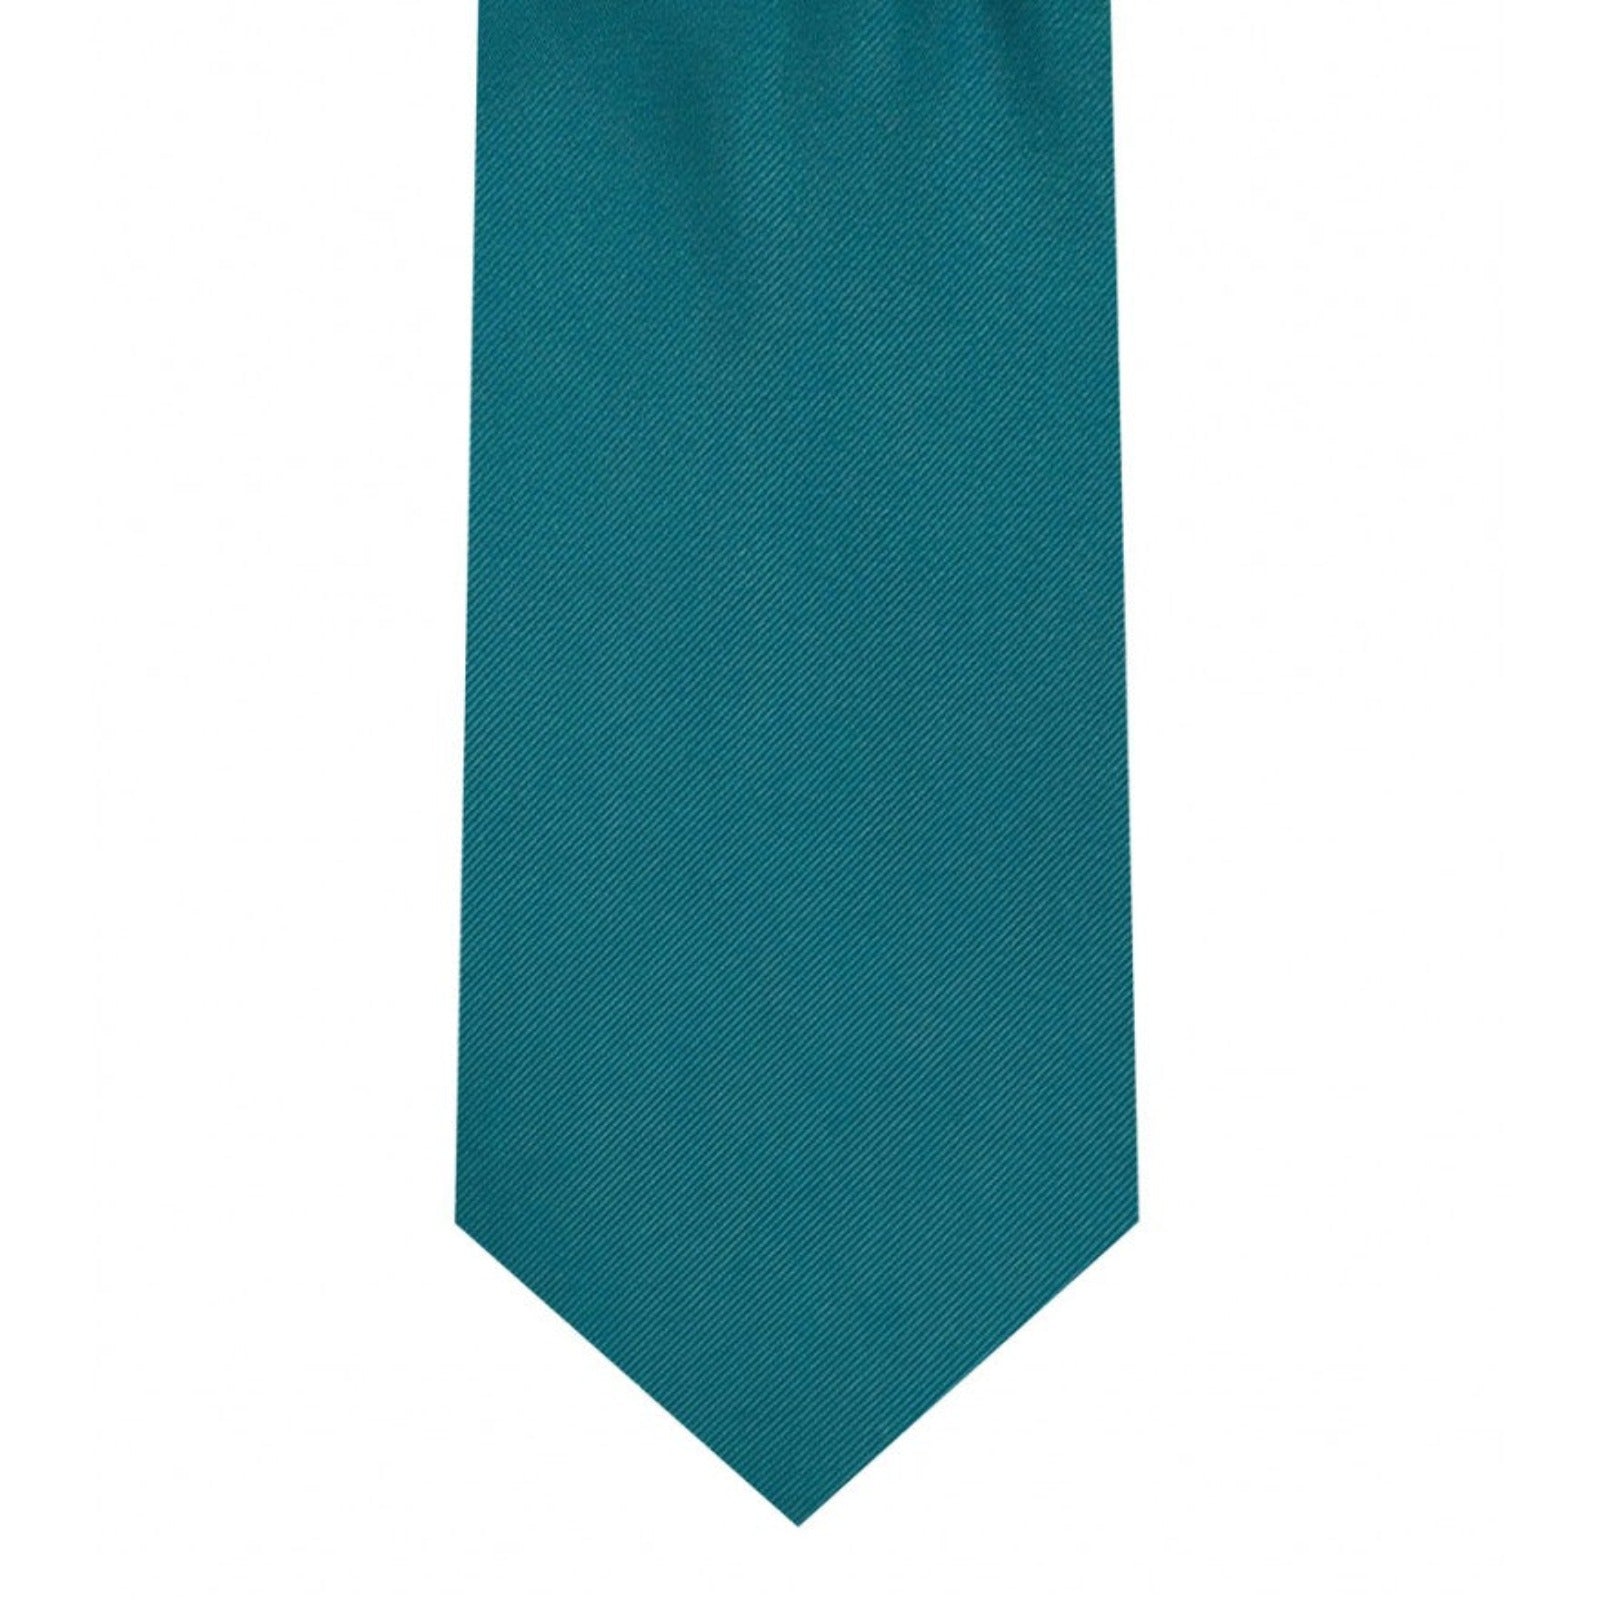 Classic Sapphire Blue Tie Skinny width 2.75 inches With Matching Pocket Square | KCT Menswear 